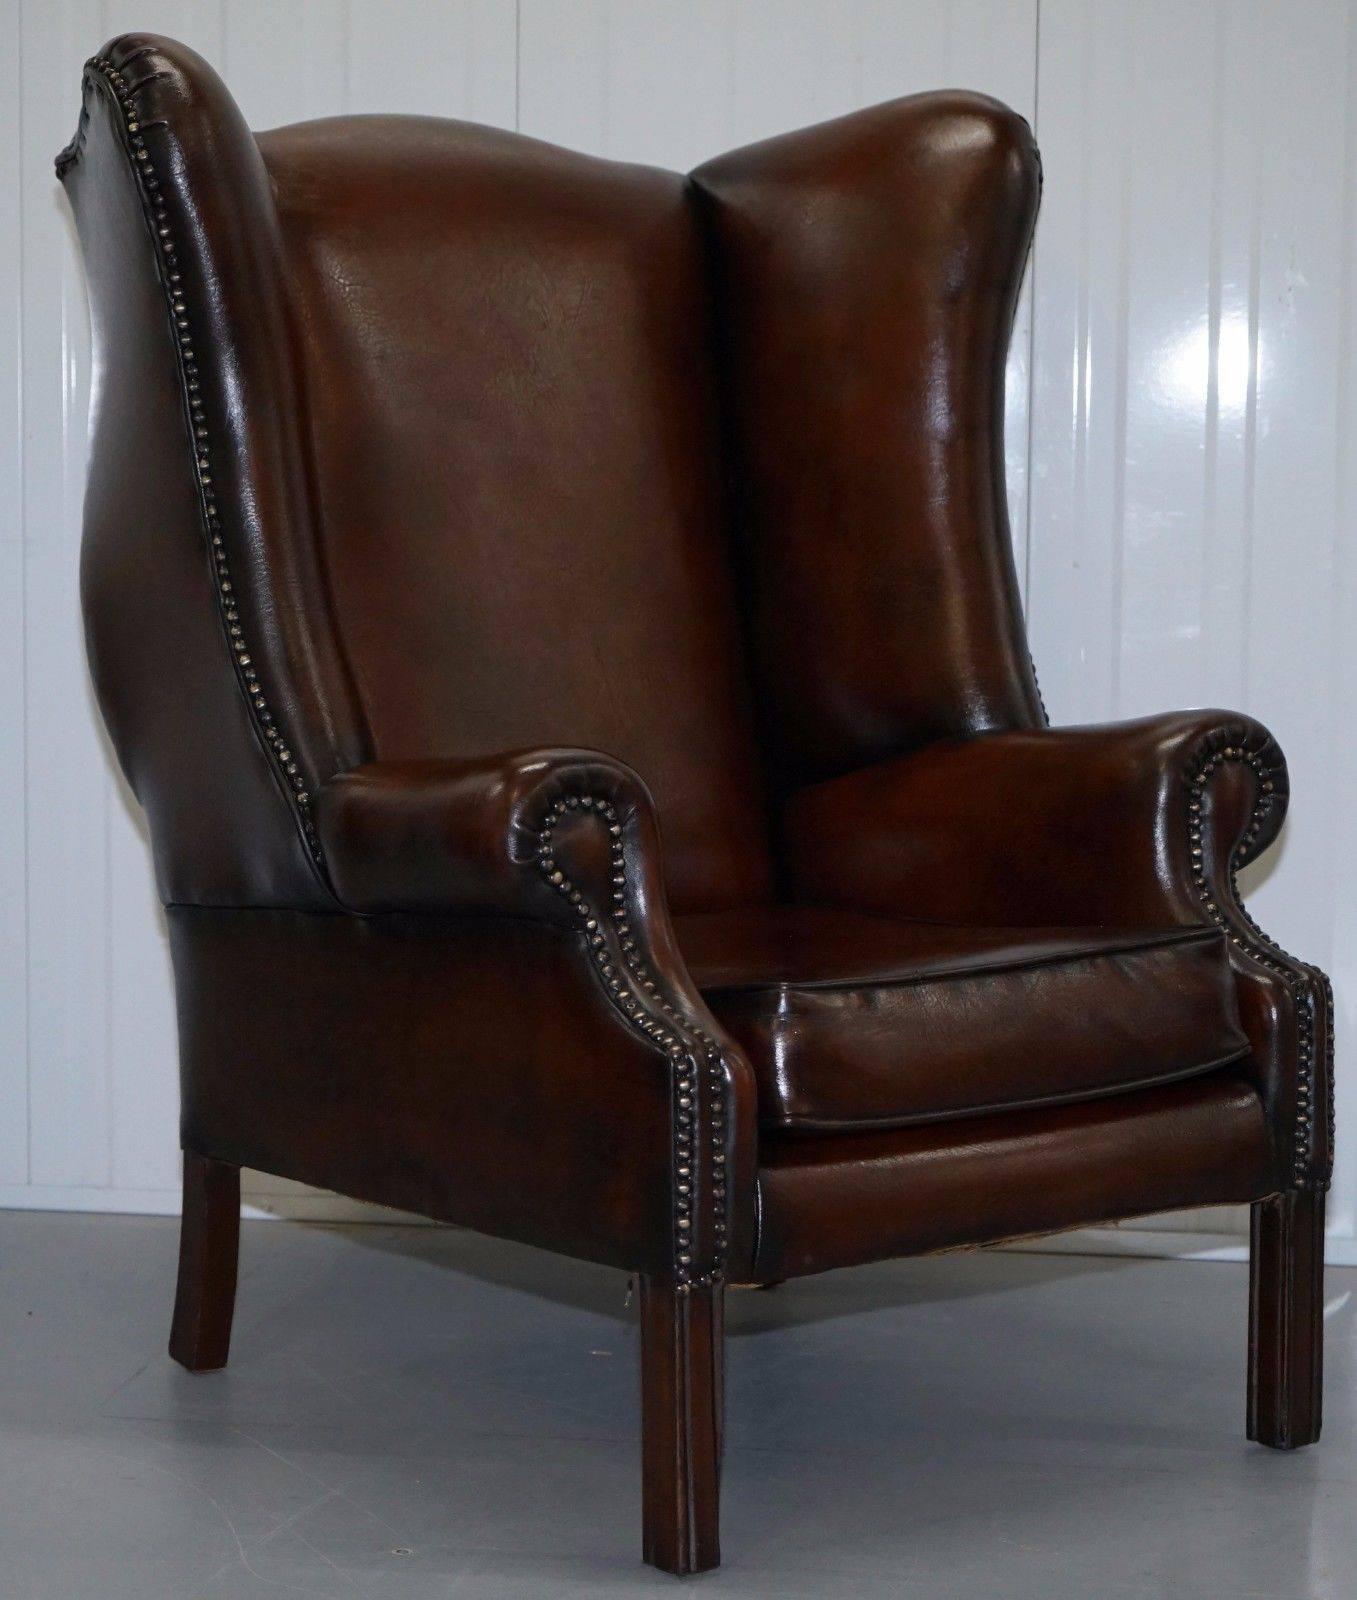 We are delighted to offer for sale this pair of restored aged brown leather Porters wingback armchairs with Georgian style straight legs

Please note the delivery fee listed is just a guide, for an accurate quote please send me your postcode and